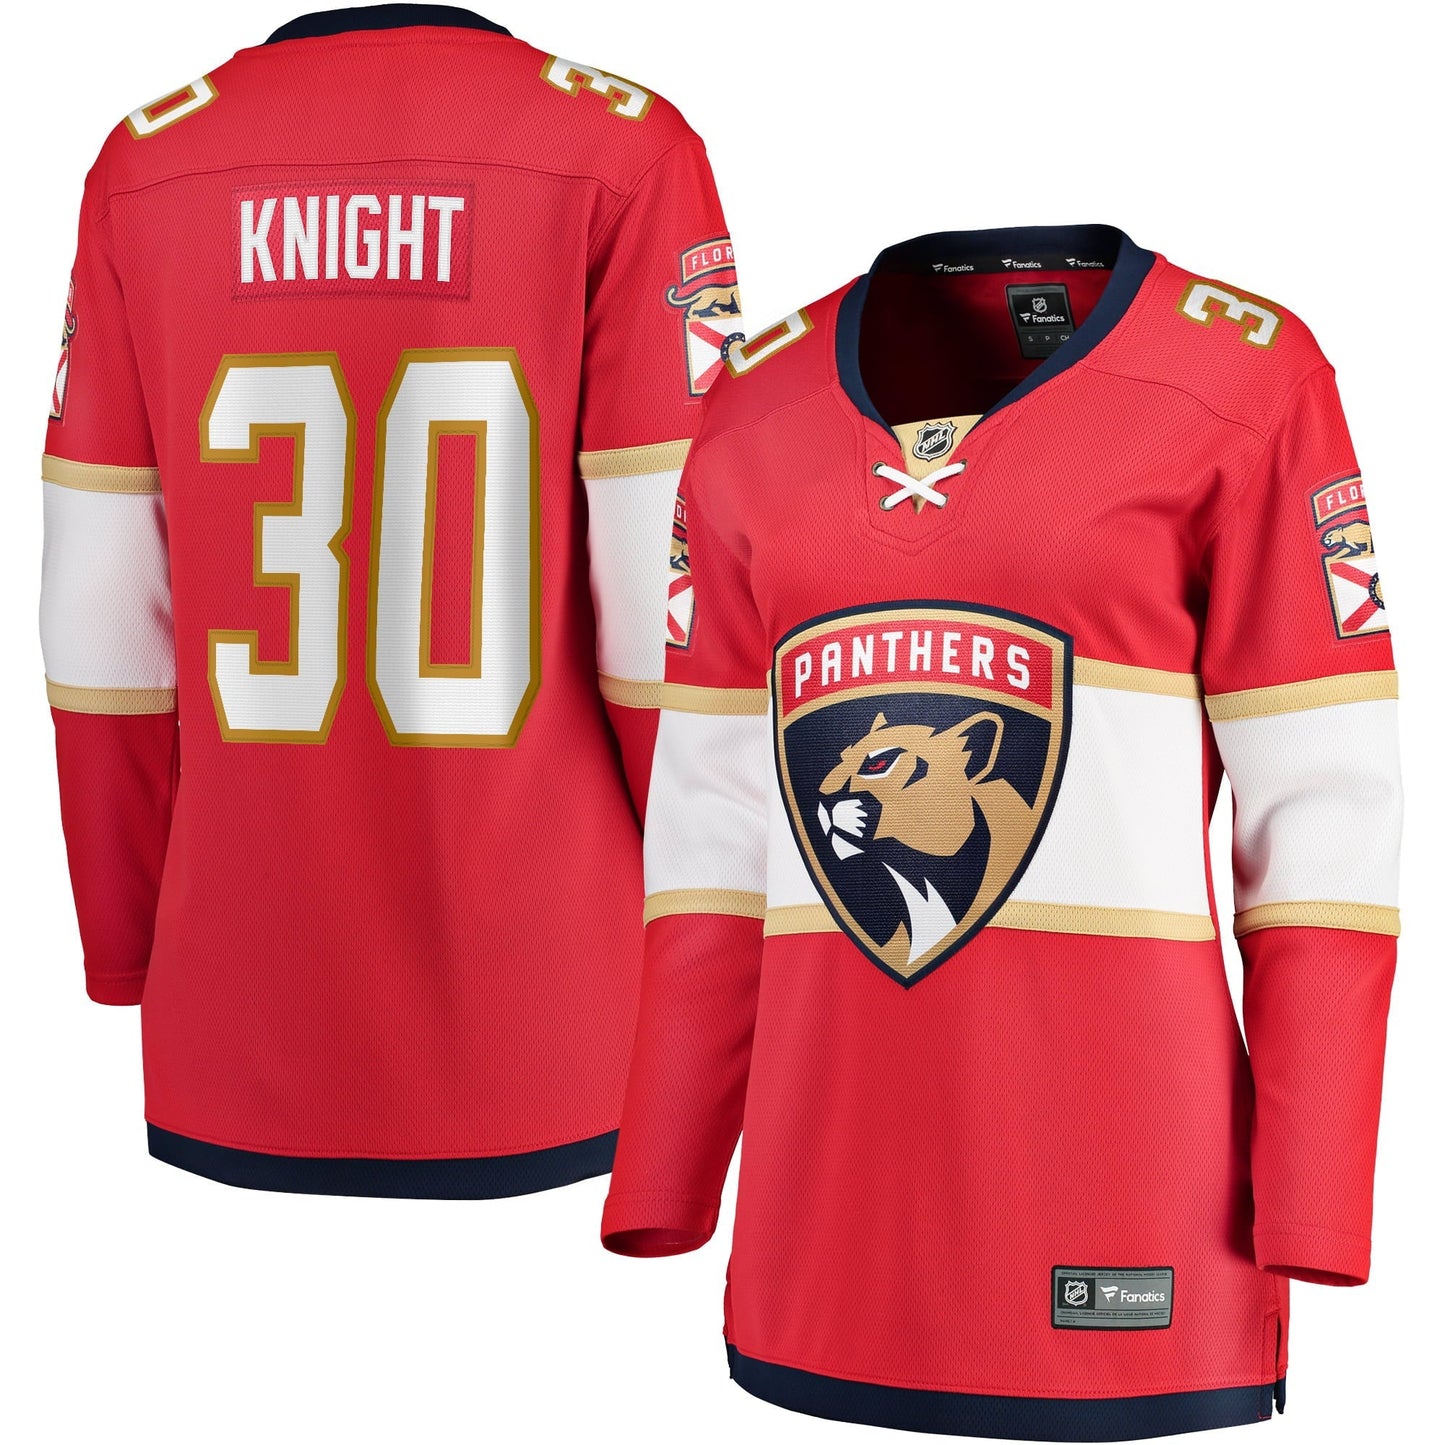 Women's Fanatics Branded Spencer Knight Red Florida Panthers 2017/18 Home Breakaway Jersey